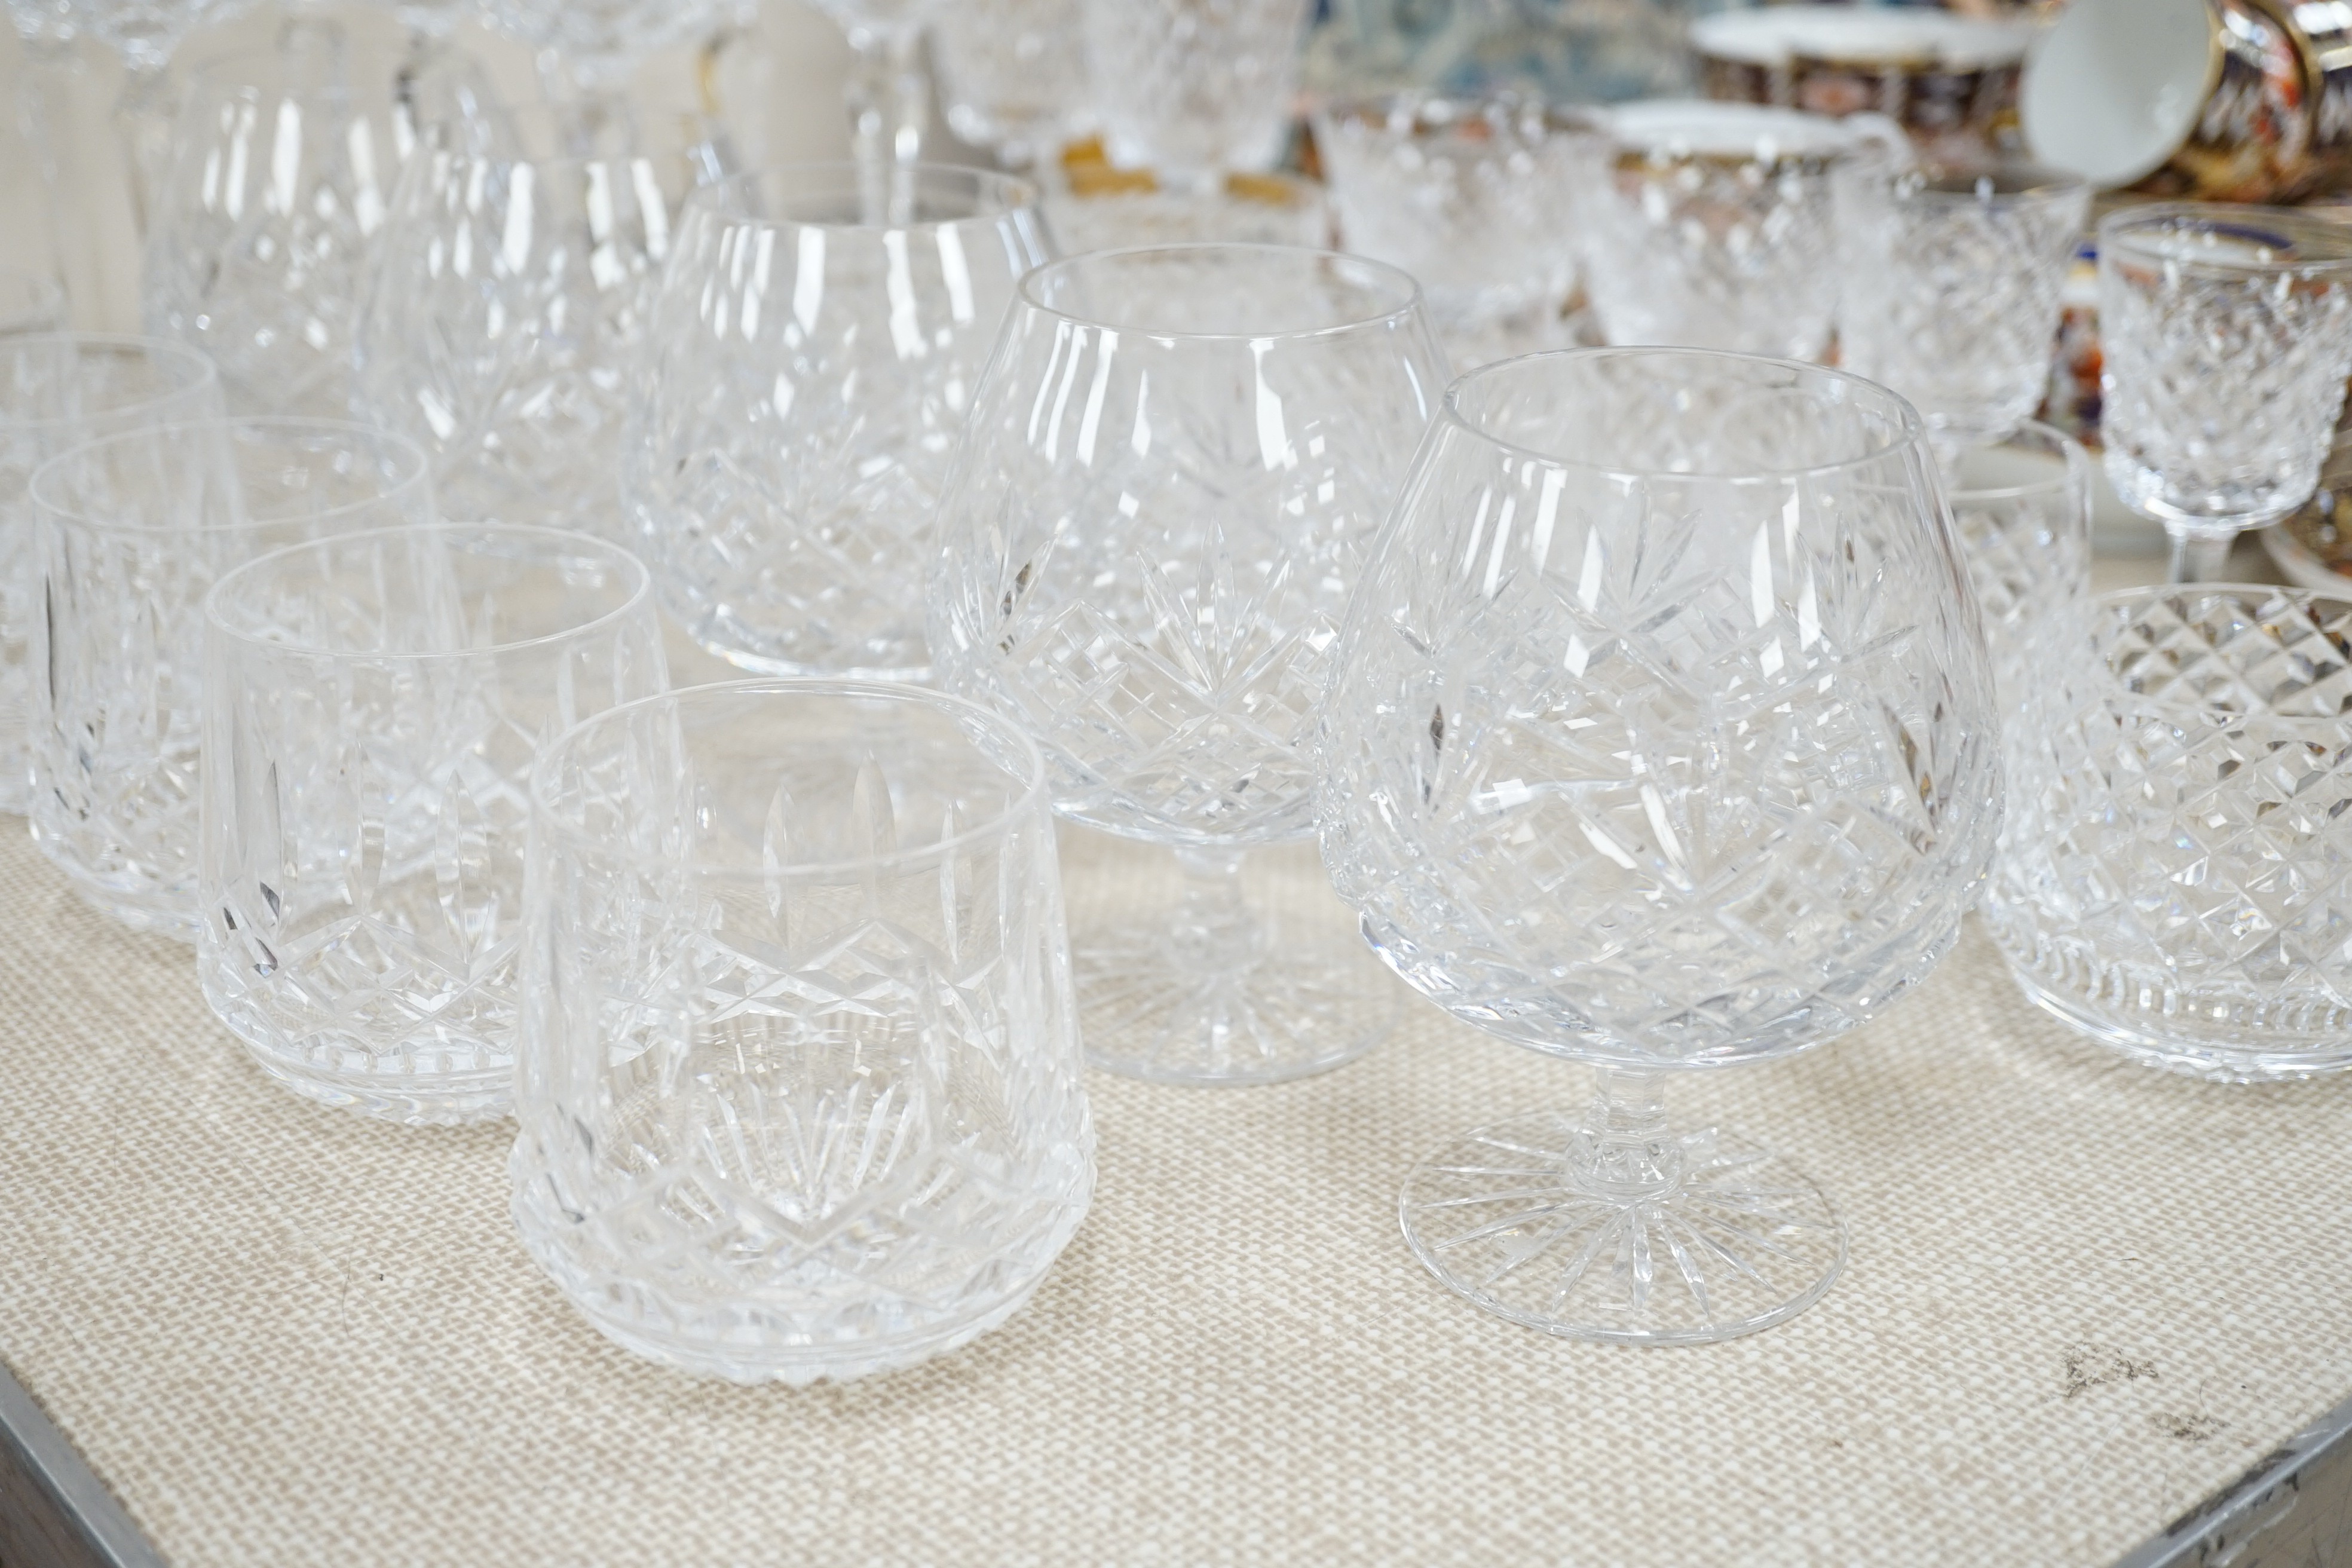 A part suite of Waterford drinking glassware in Alana pattern and others